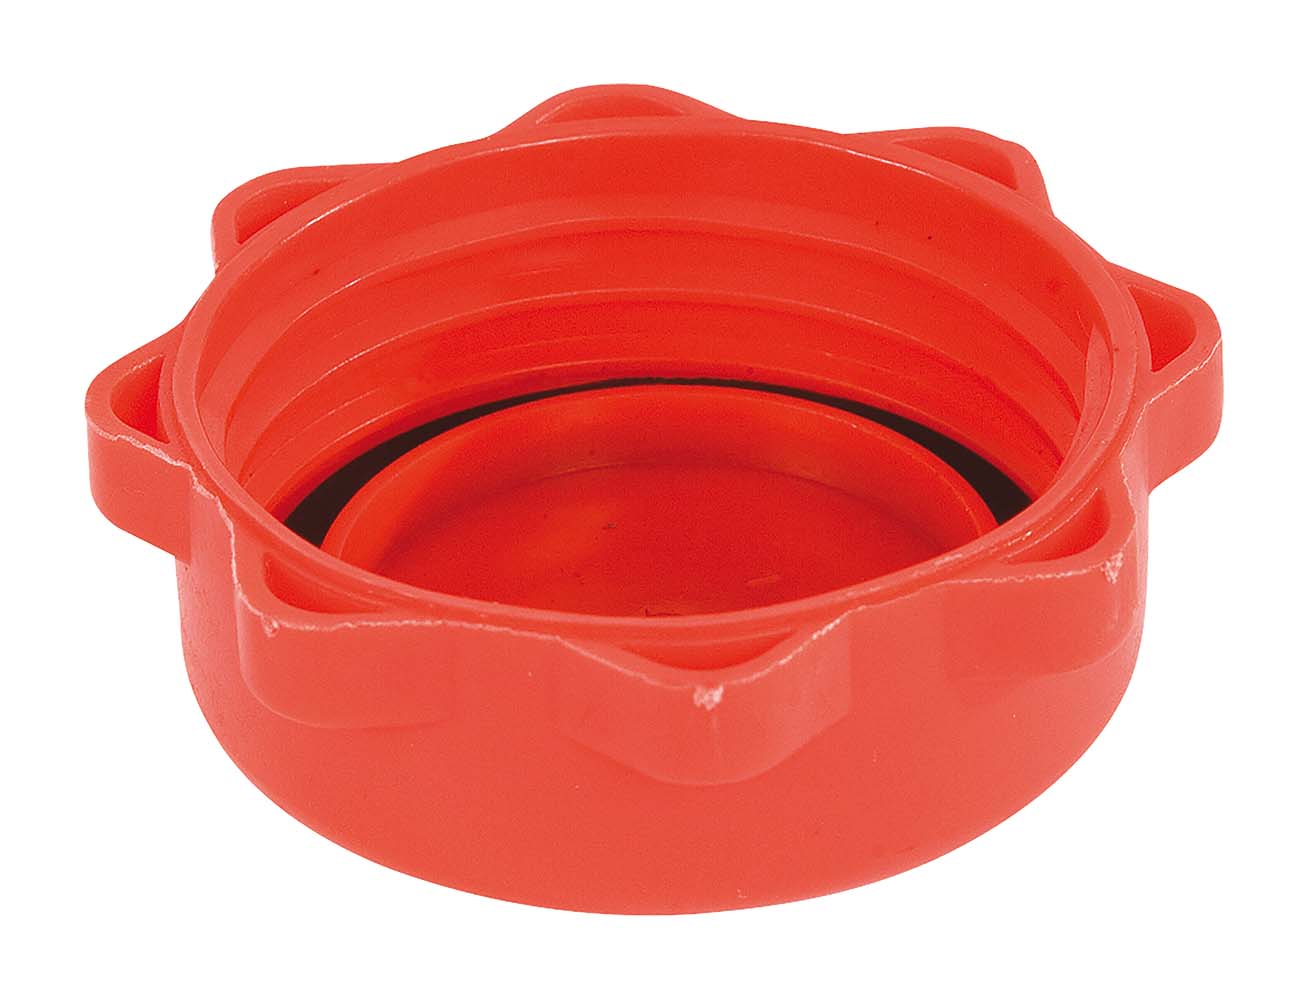 6632210 Loose lid for the waste water tank. Suitable for an inlet of 9 cm. Ideal for replacement in the event of loss or damage